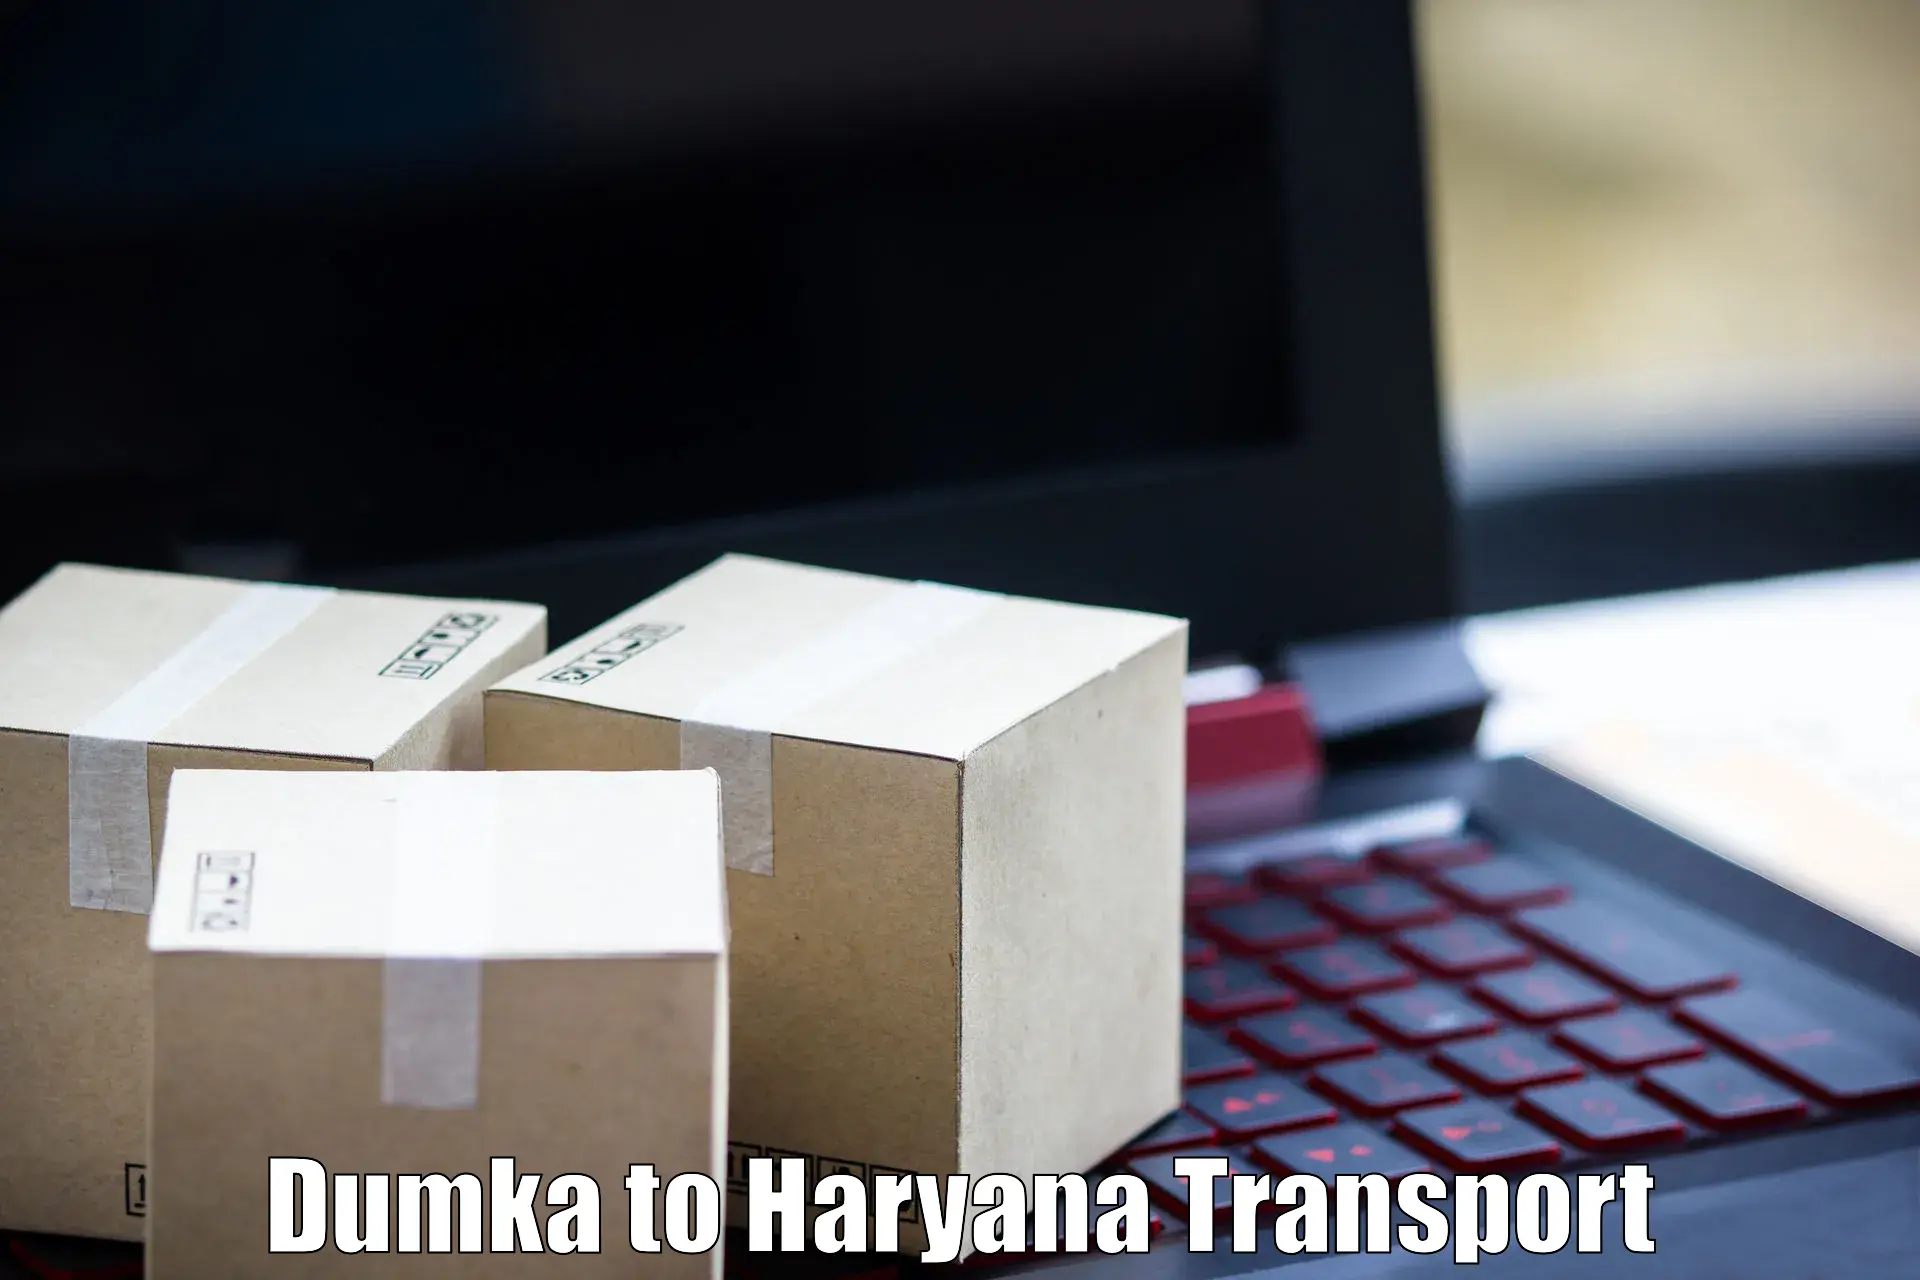 Best transport services in India Dumka to Sonipat